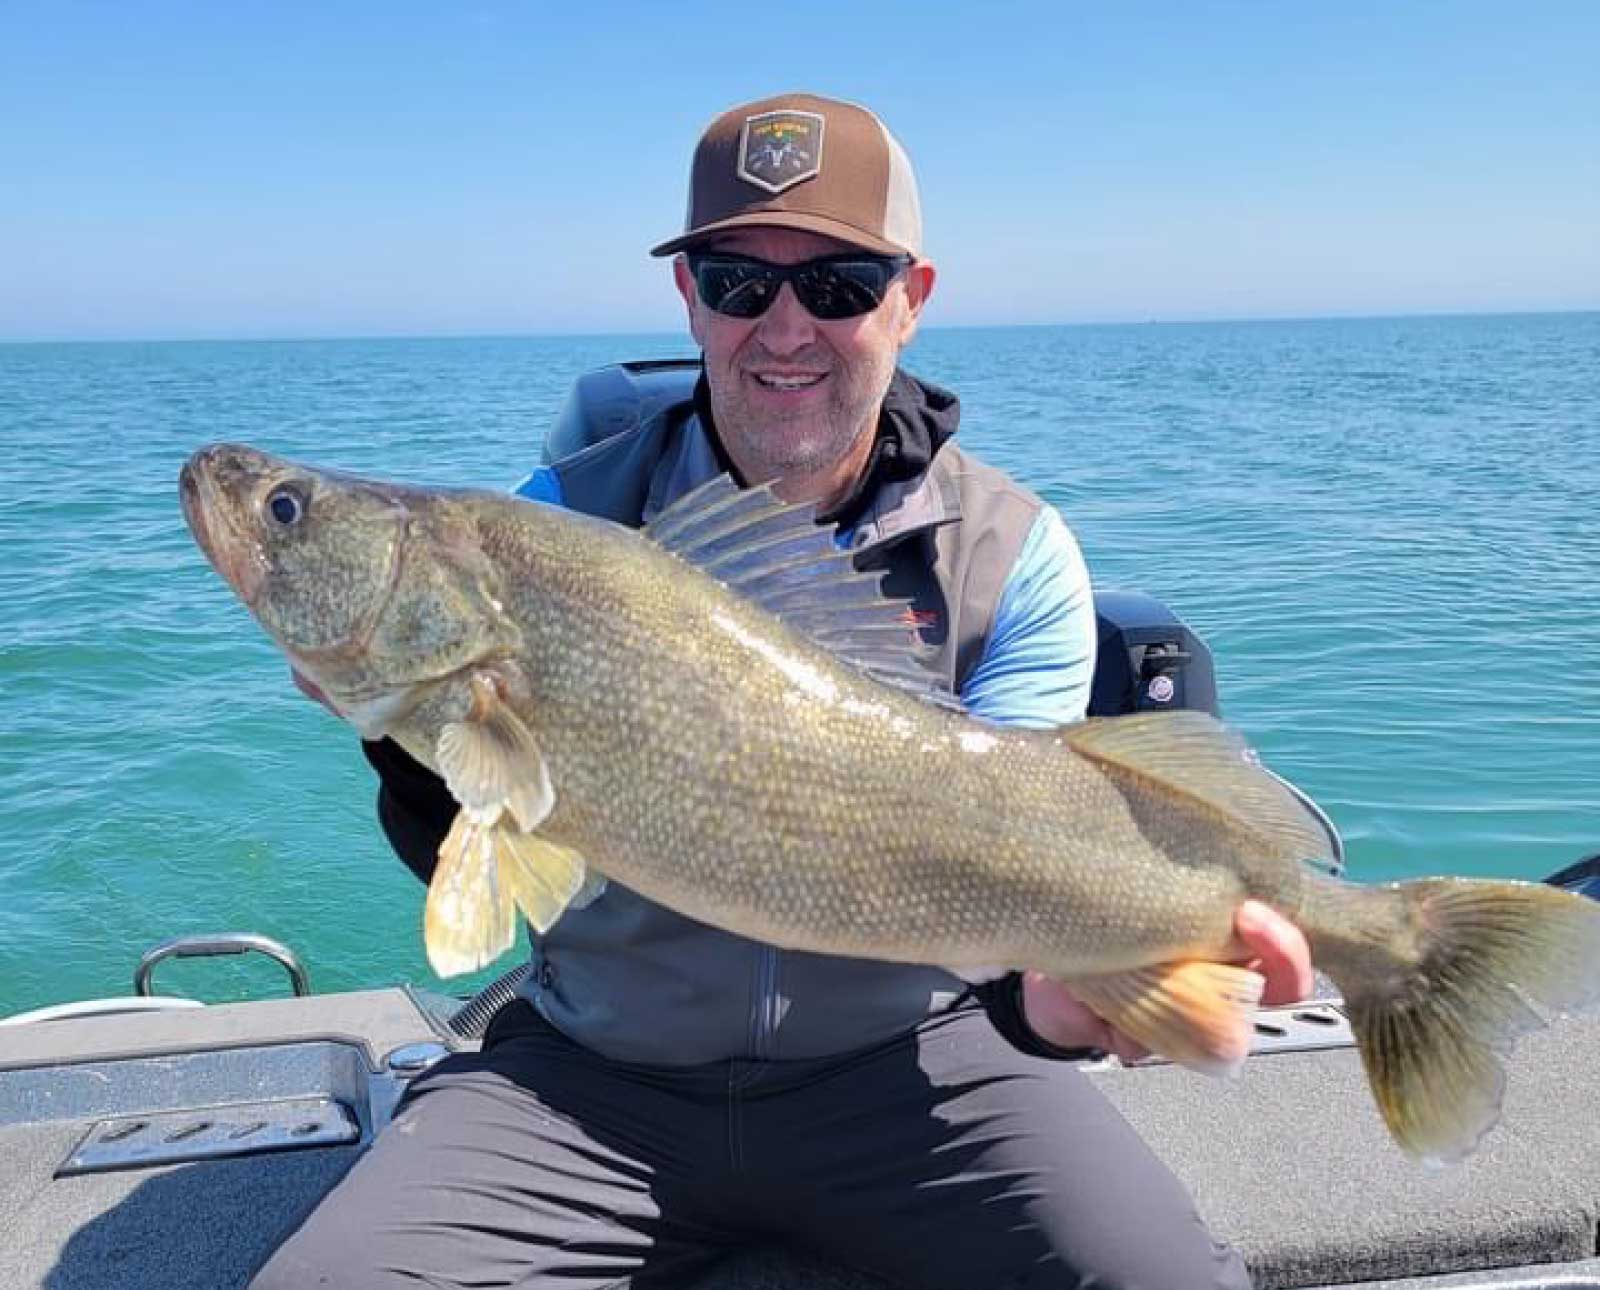 http://powderhook.com/wp-content/uploads/2022/06/Exploring-the-Different-Style-Trips-to-Fishing-Lake-Erie.jpg